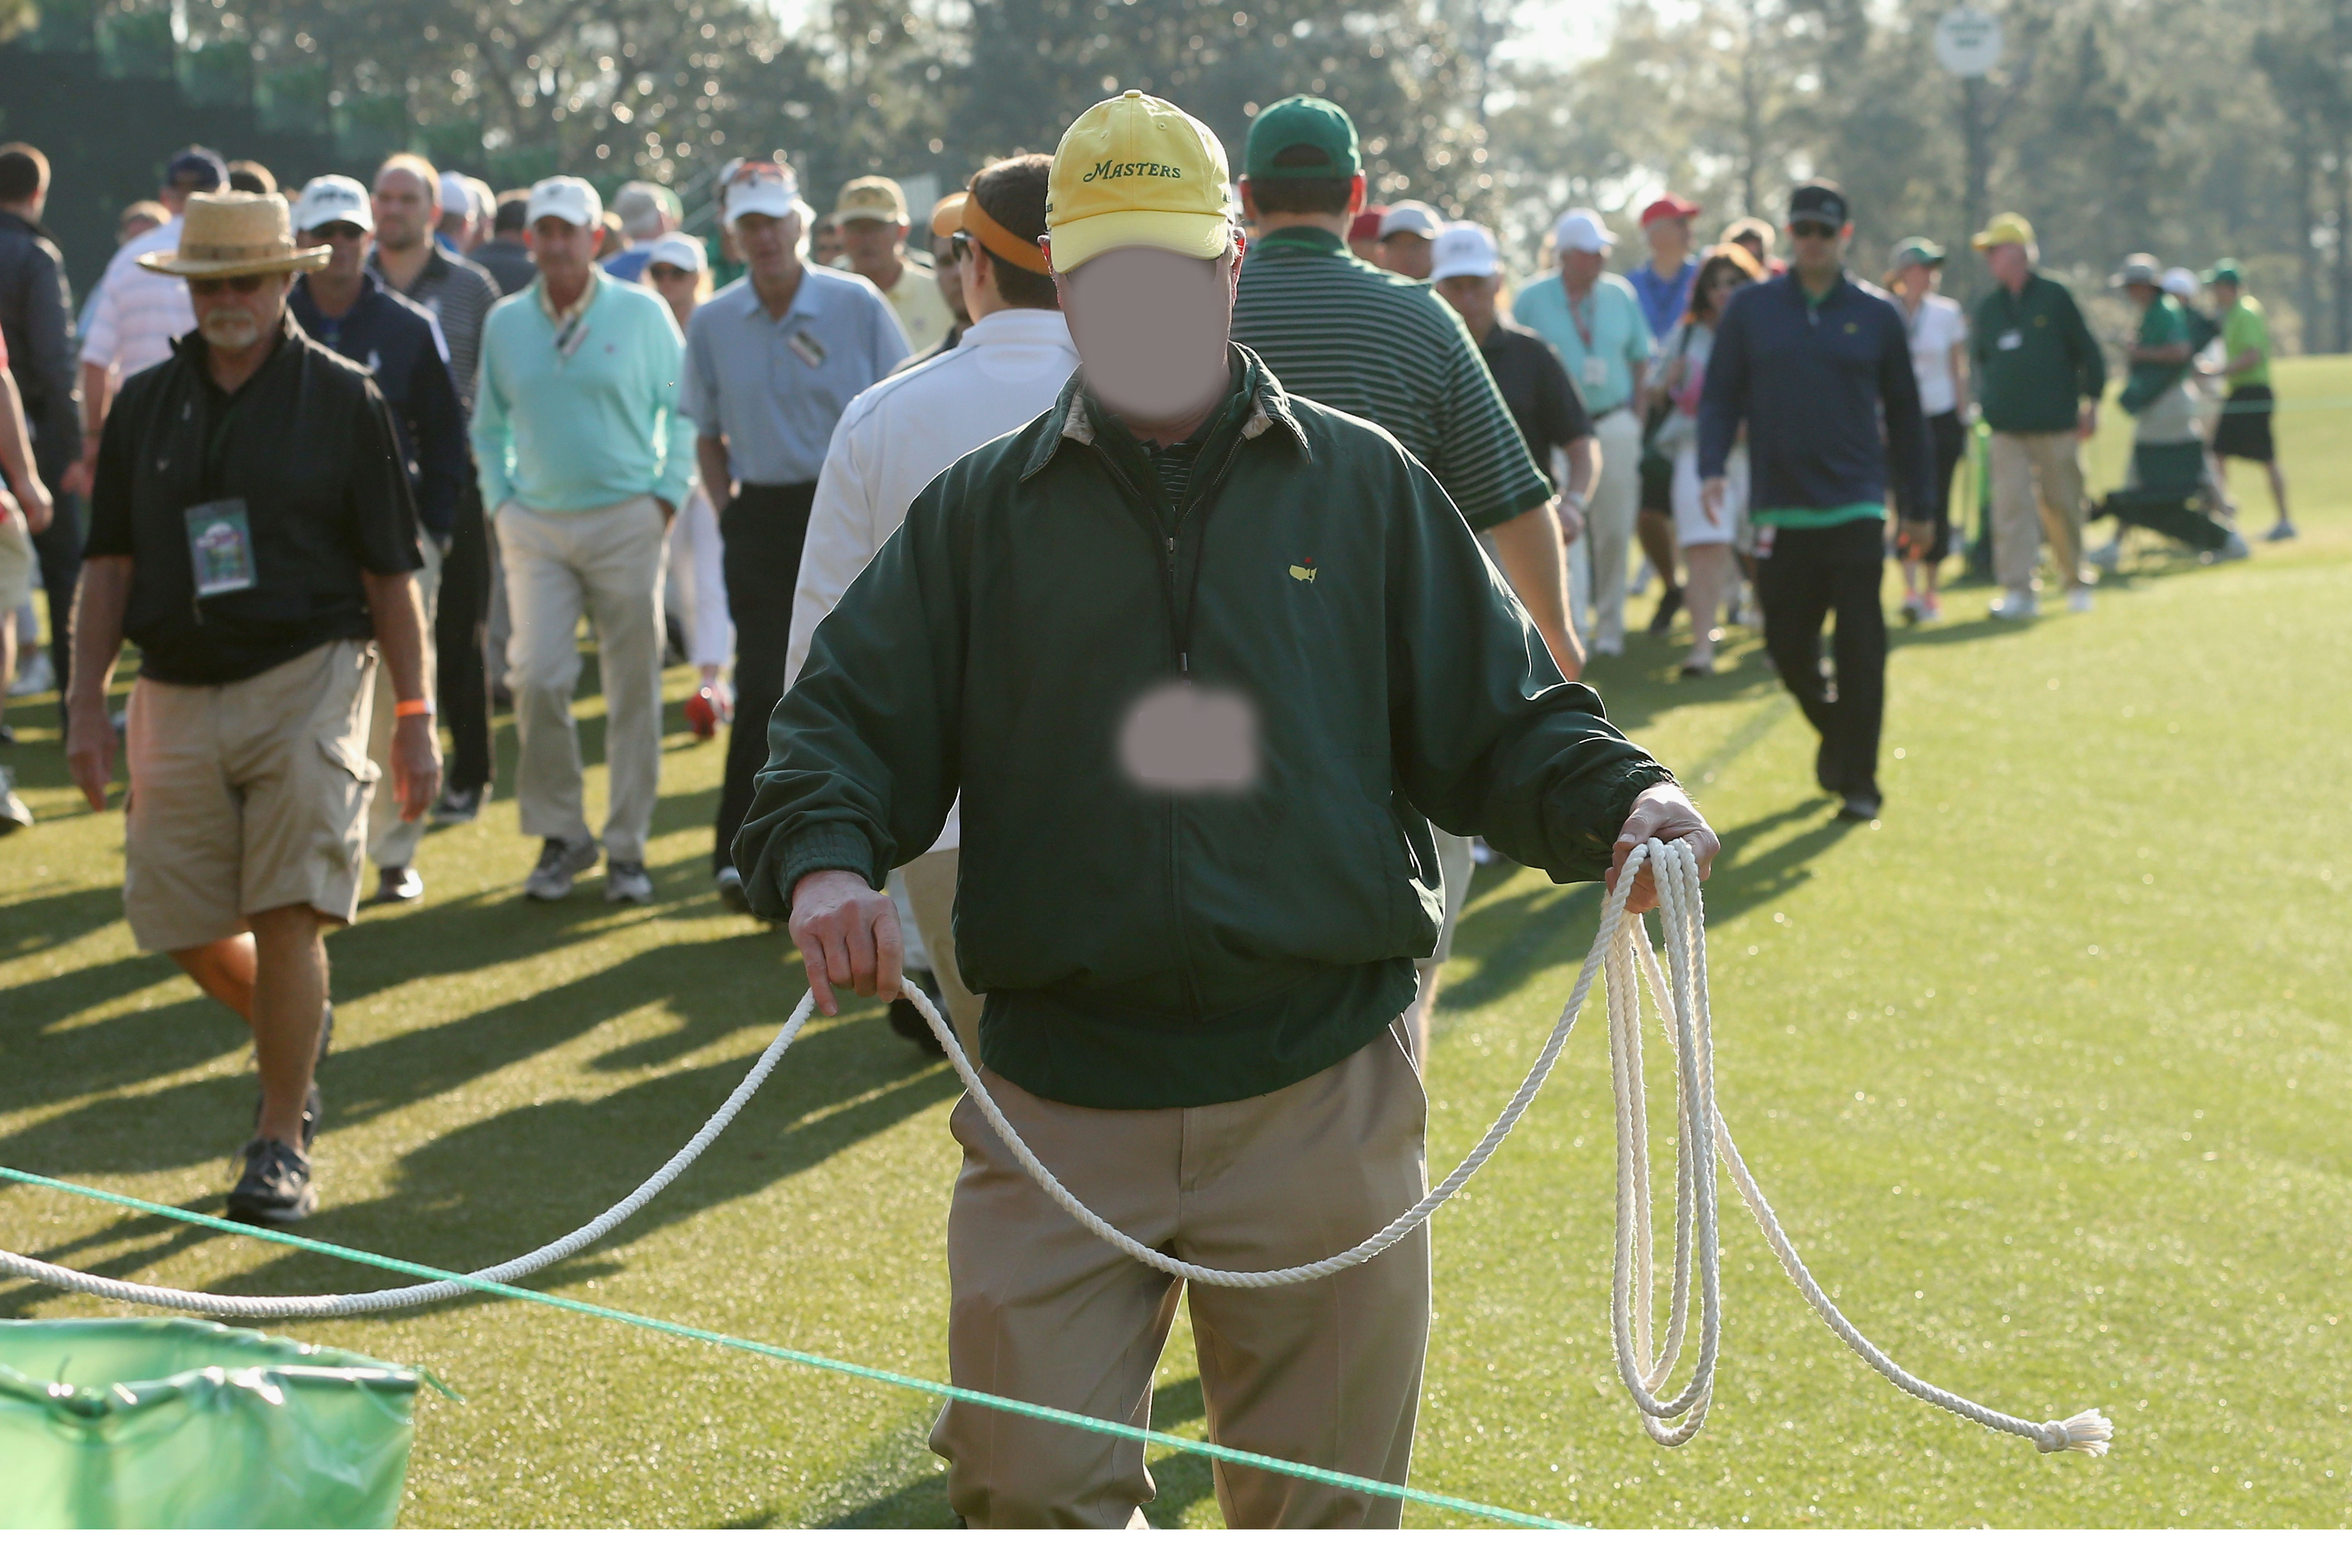 Confessions of a Masters gallery guard: "They've got more rules than. . . "  | This is the Loop | Golf Digest